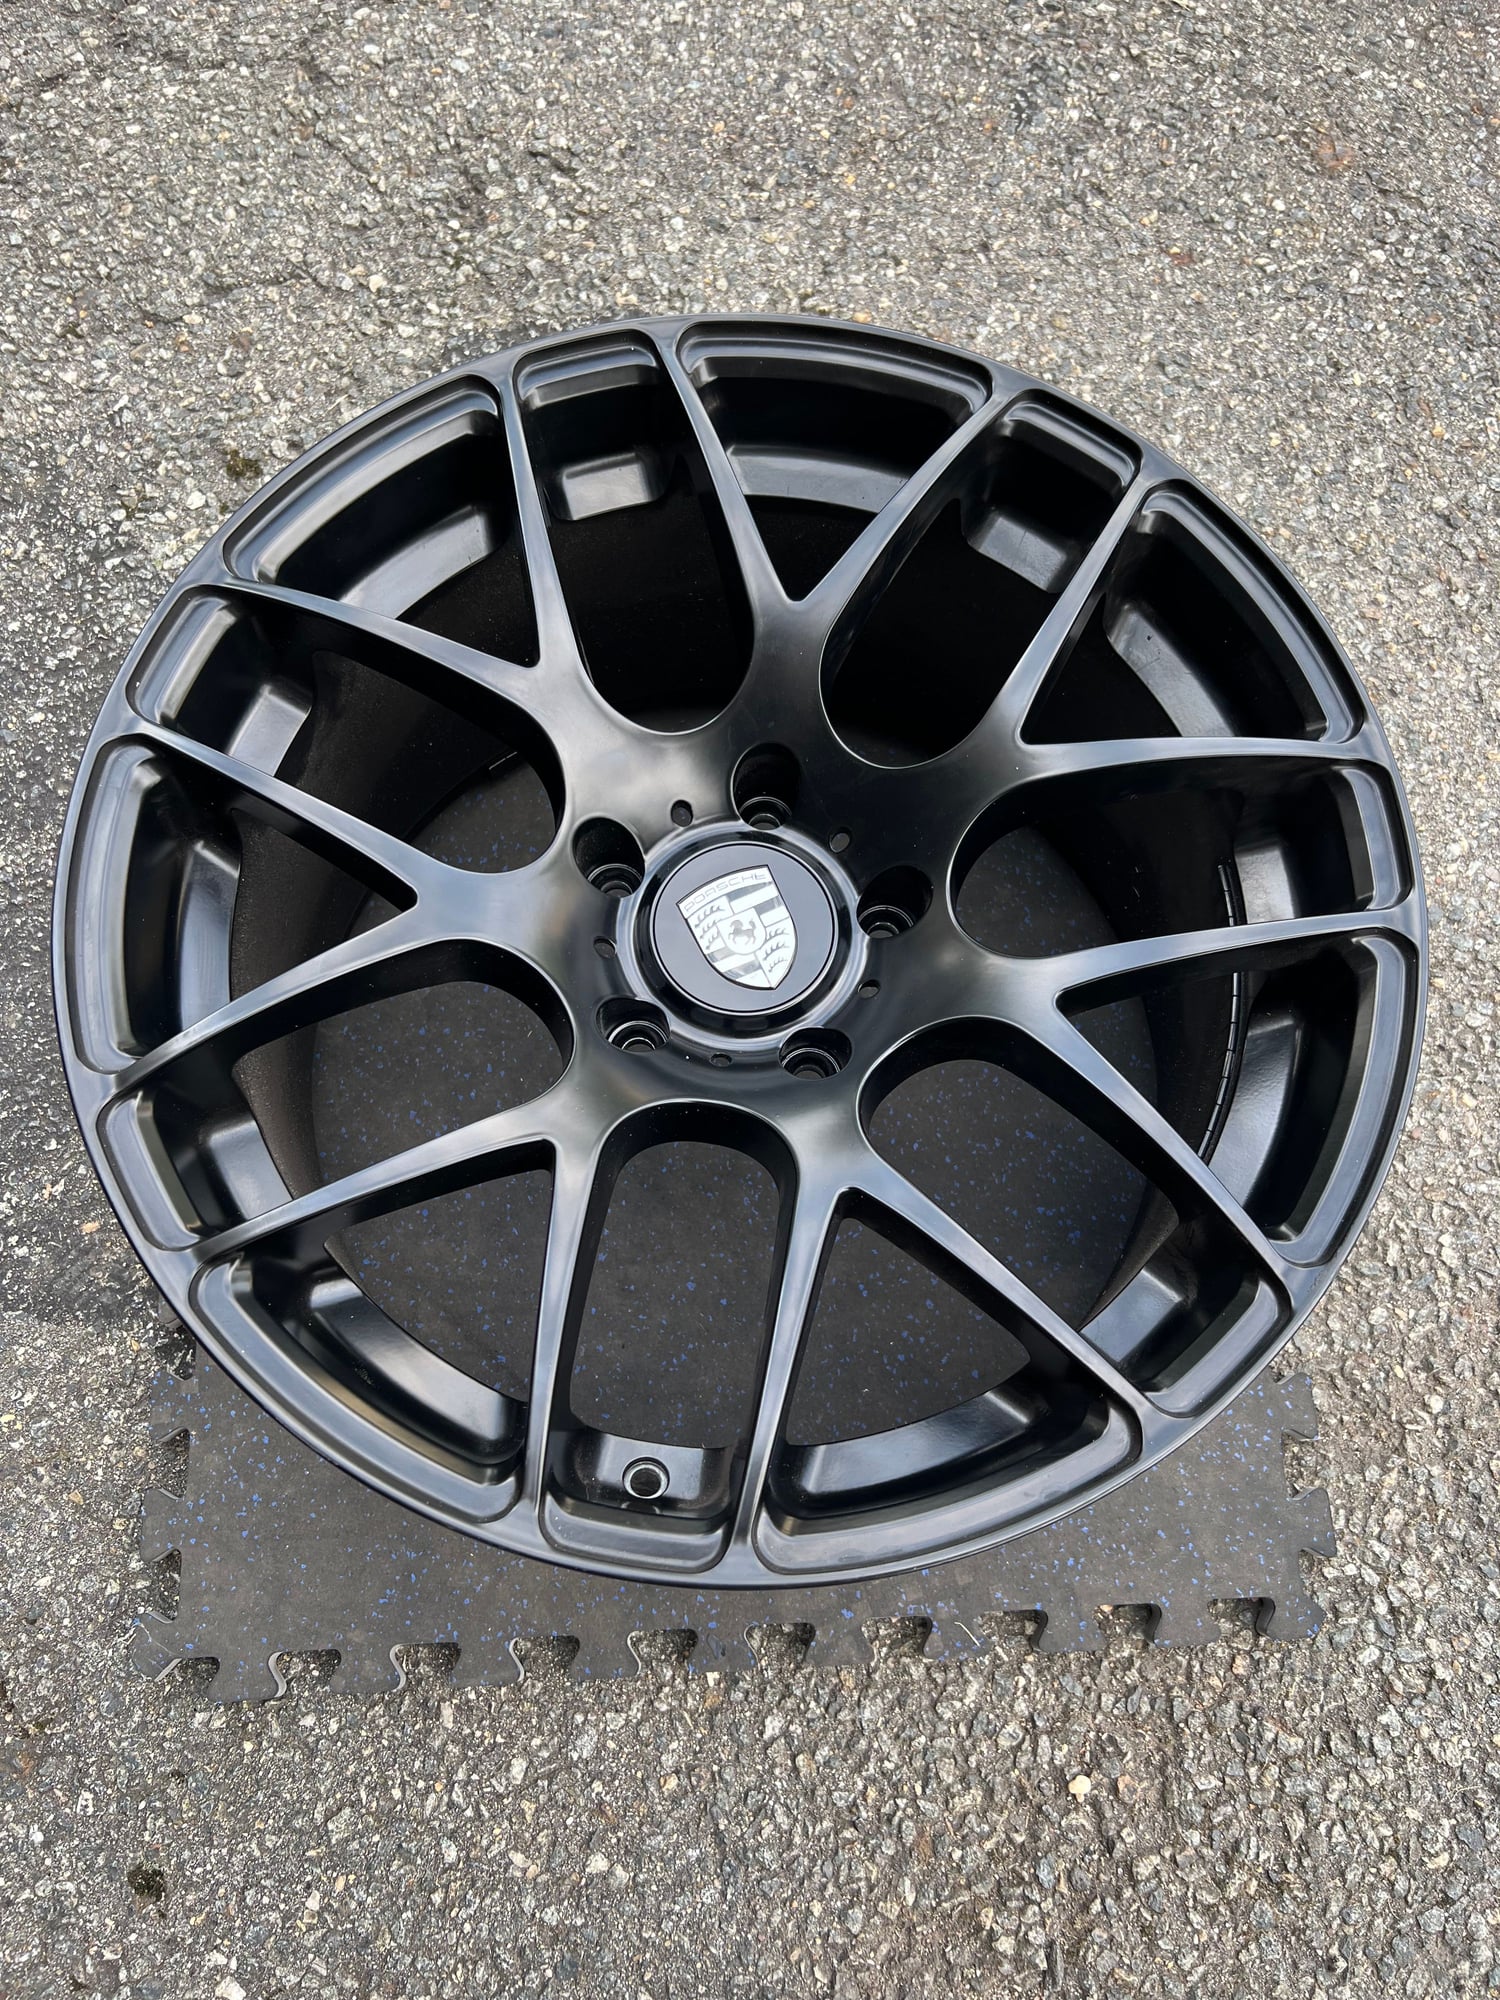 Wheels and Tires/Axles - 997.1 Turbo Wheels - Used - 2007 to 2009 Porsche 911 - East Hanover, NJ 07936, United States